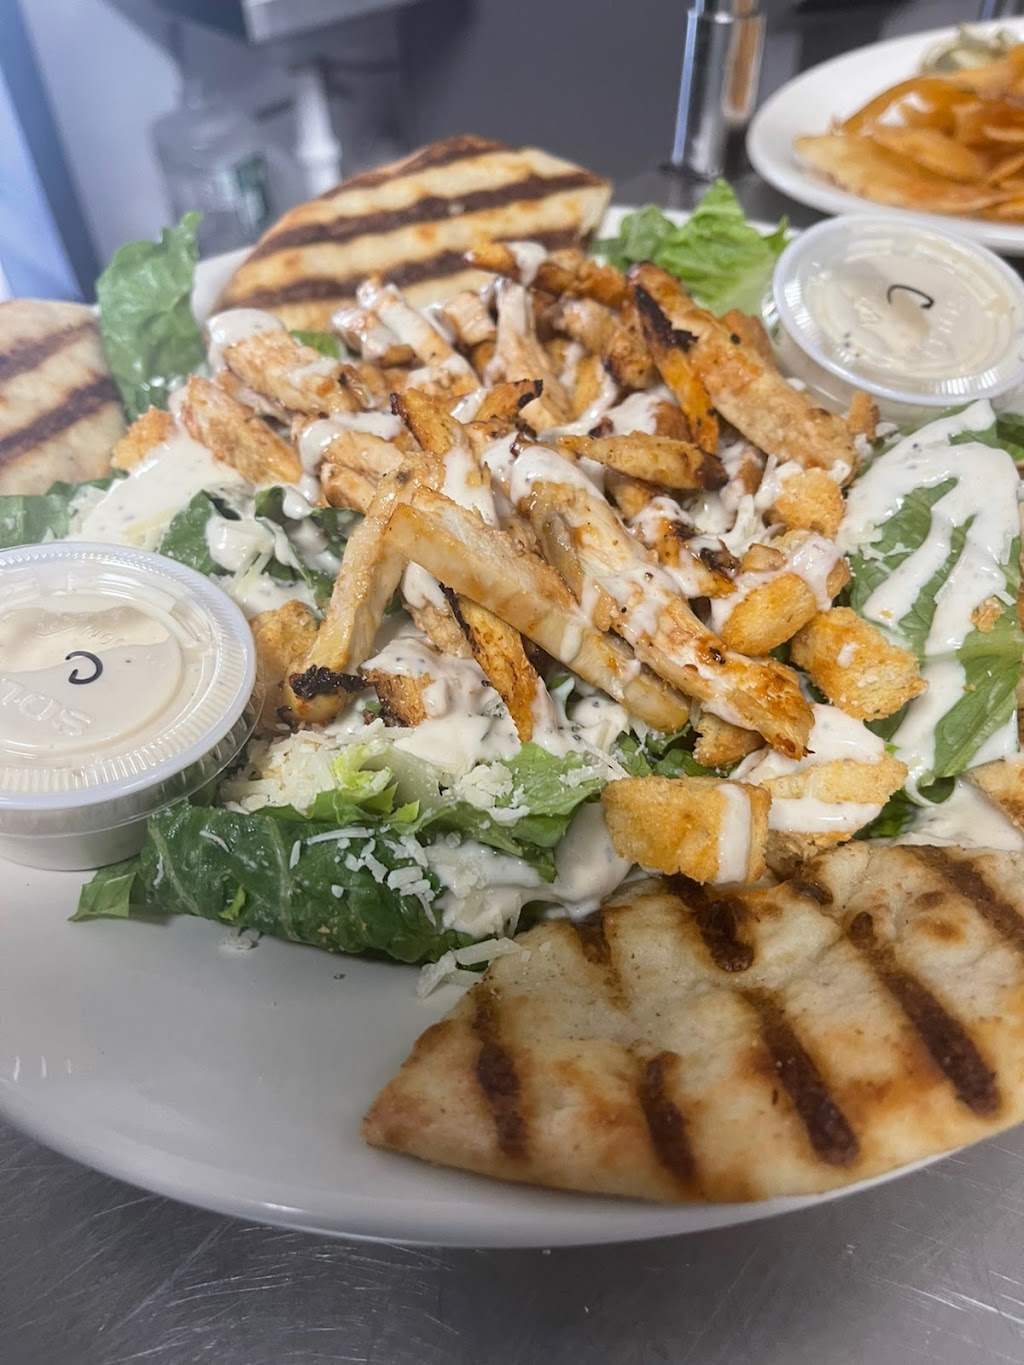 Railway Cafe | 580 Main St, Winsted, CT 06098 | Phone: (860) 238-7677